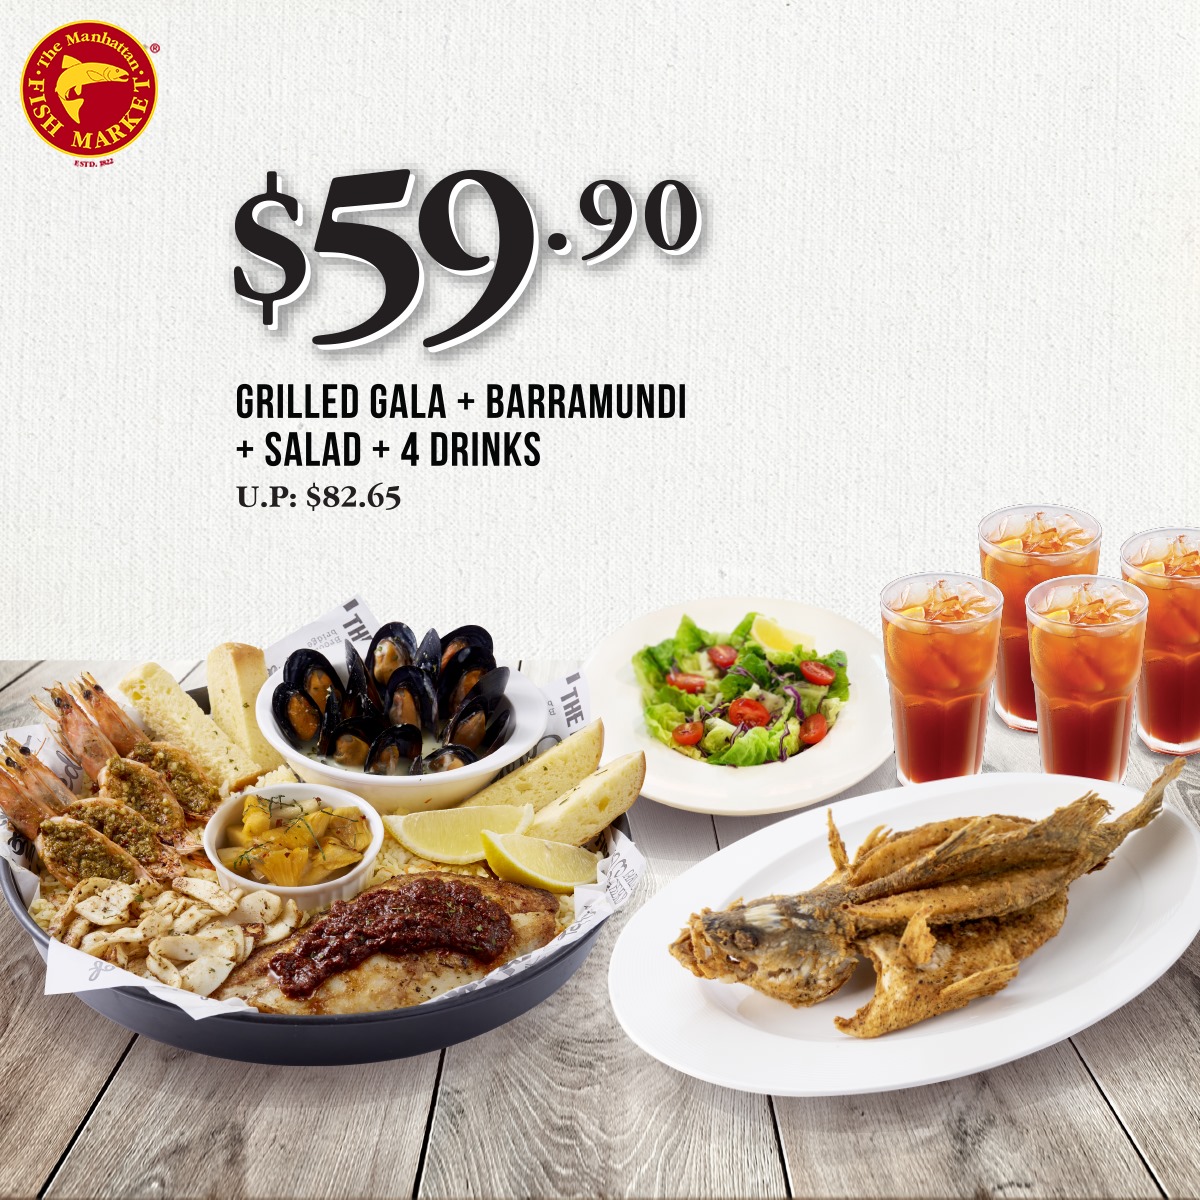 Flash these coupons from The Manhattan FISH MARKET on your mobile devices to enjoy great savings - 8